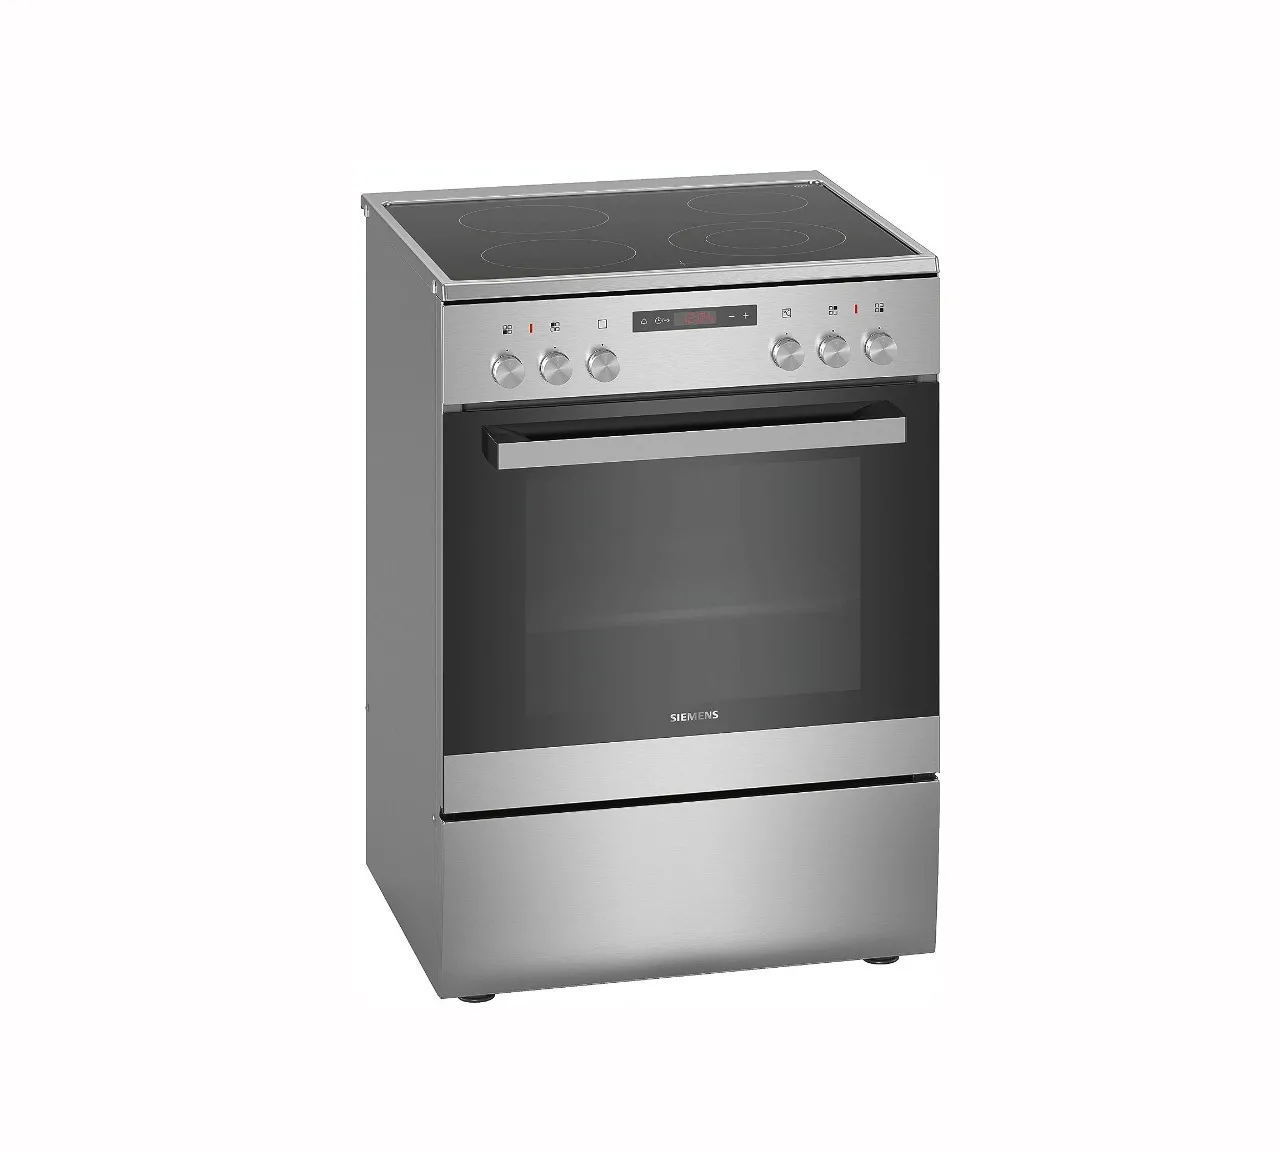 Siemens Free Standing Electric Cooker 60 x 60 cm Color Silver Model – HK8Q3A150M –  1 Year Brand Warranty.